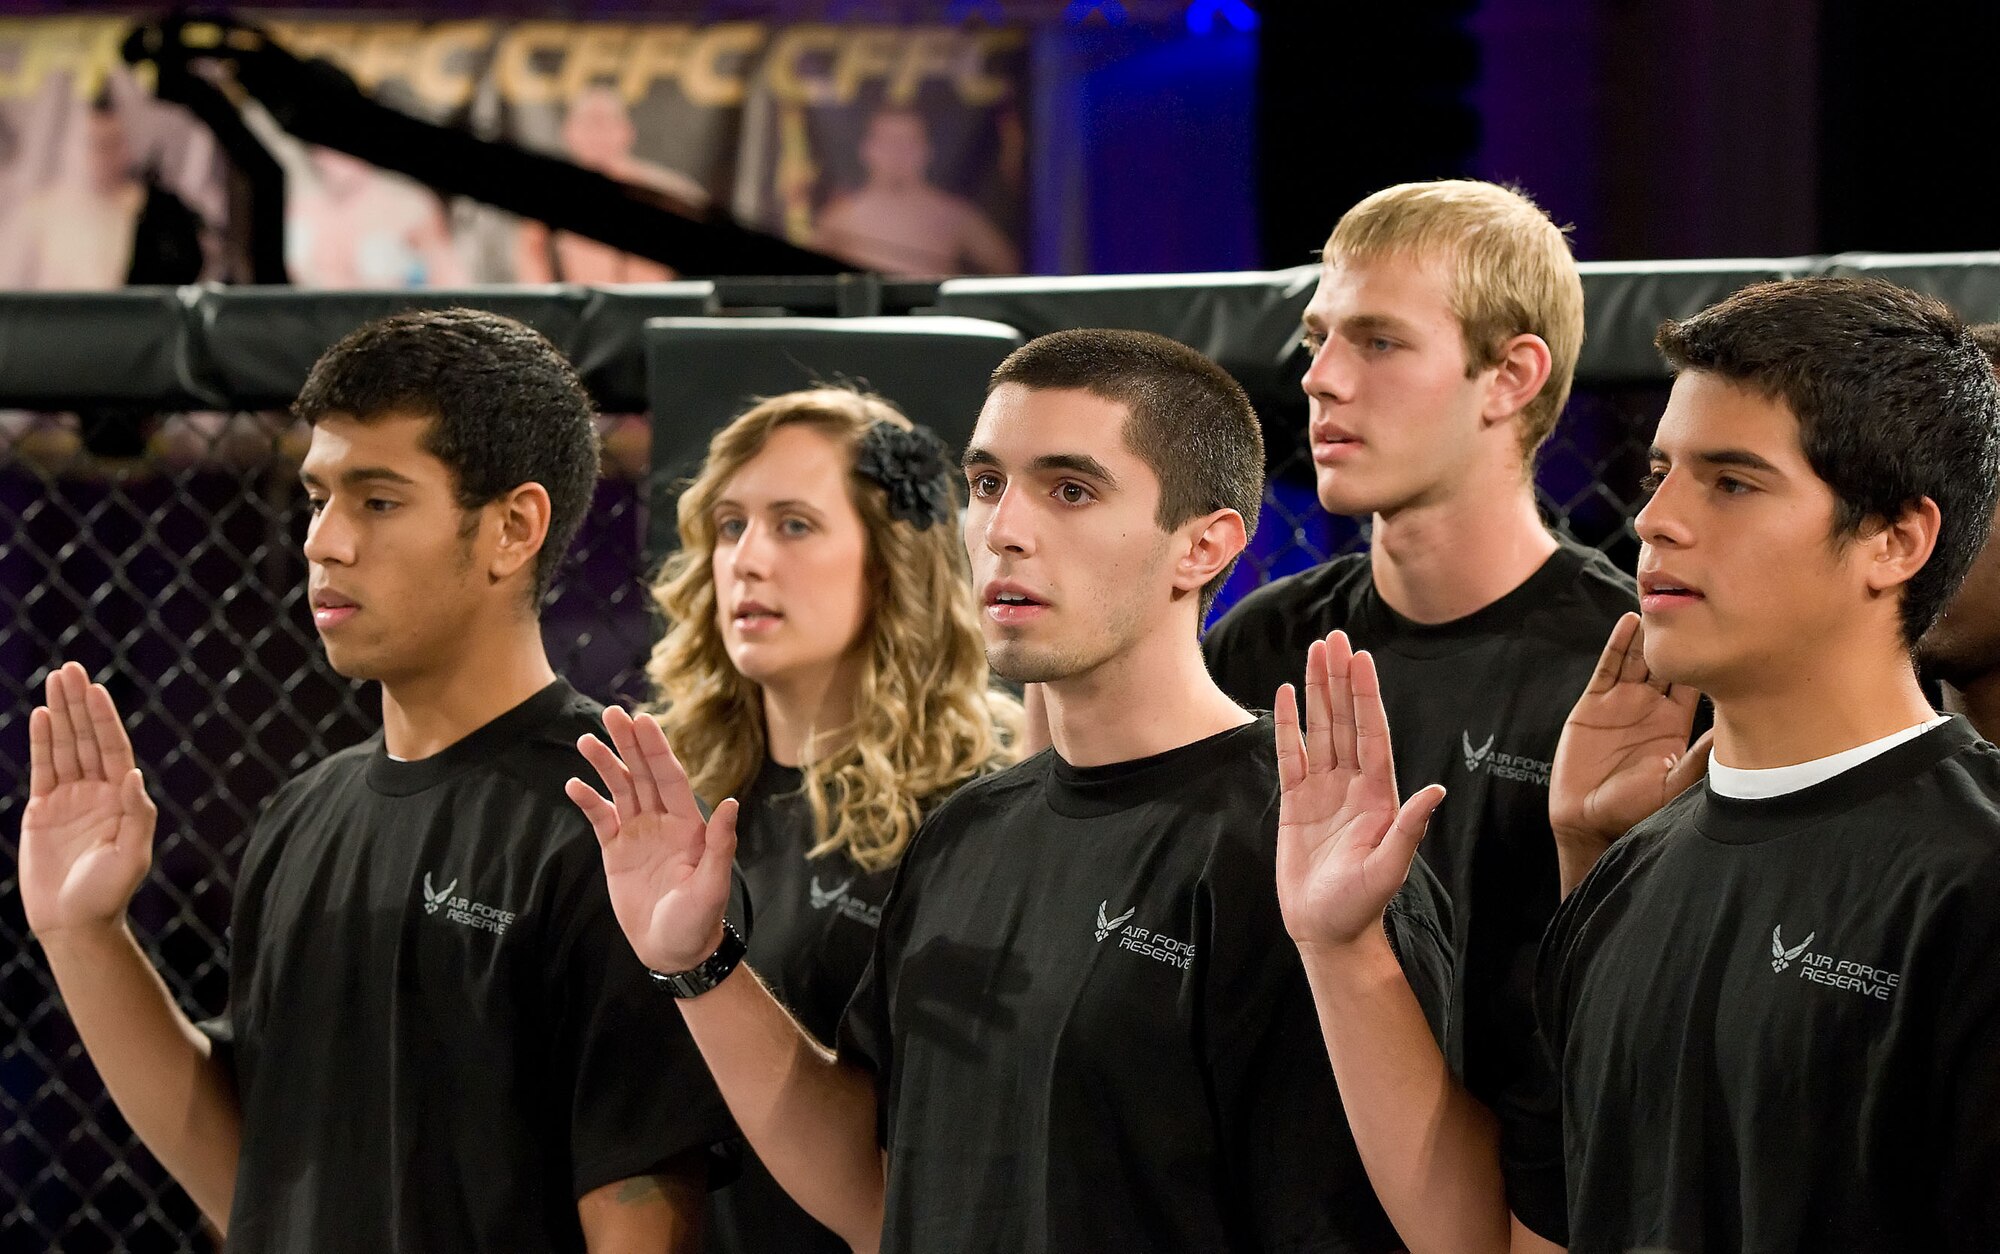 Pictured are five of 12 Delaware recruits reciting the oath of enlistment Oct. 13, 2012, during the intermission of a mixed martial arts event at the Rollins Center in Dover, Del. The new recruits will attend Basic Military Training alongside active-duty Airmen in Texas and will be assigned to the 512th Airlift Wing at Dover Air Force Base, Del.  (U.S. Air Force photo/Roland Balik)